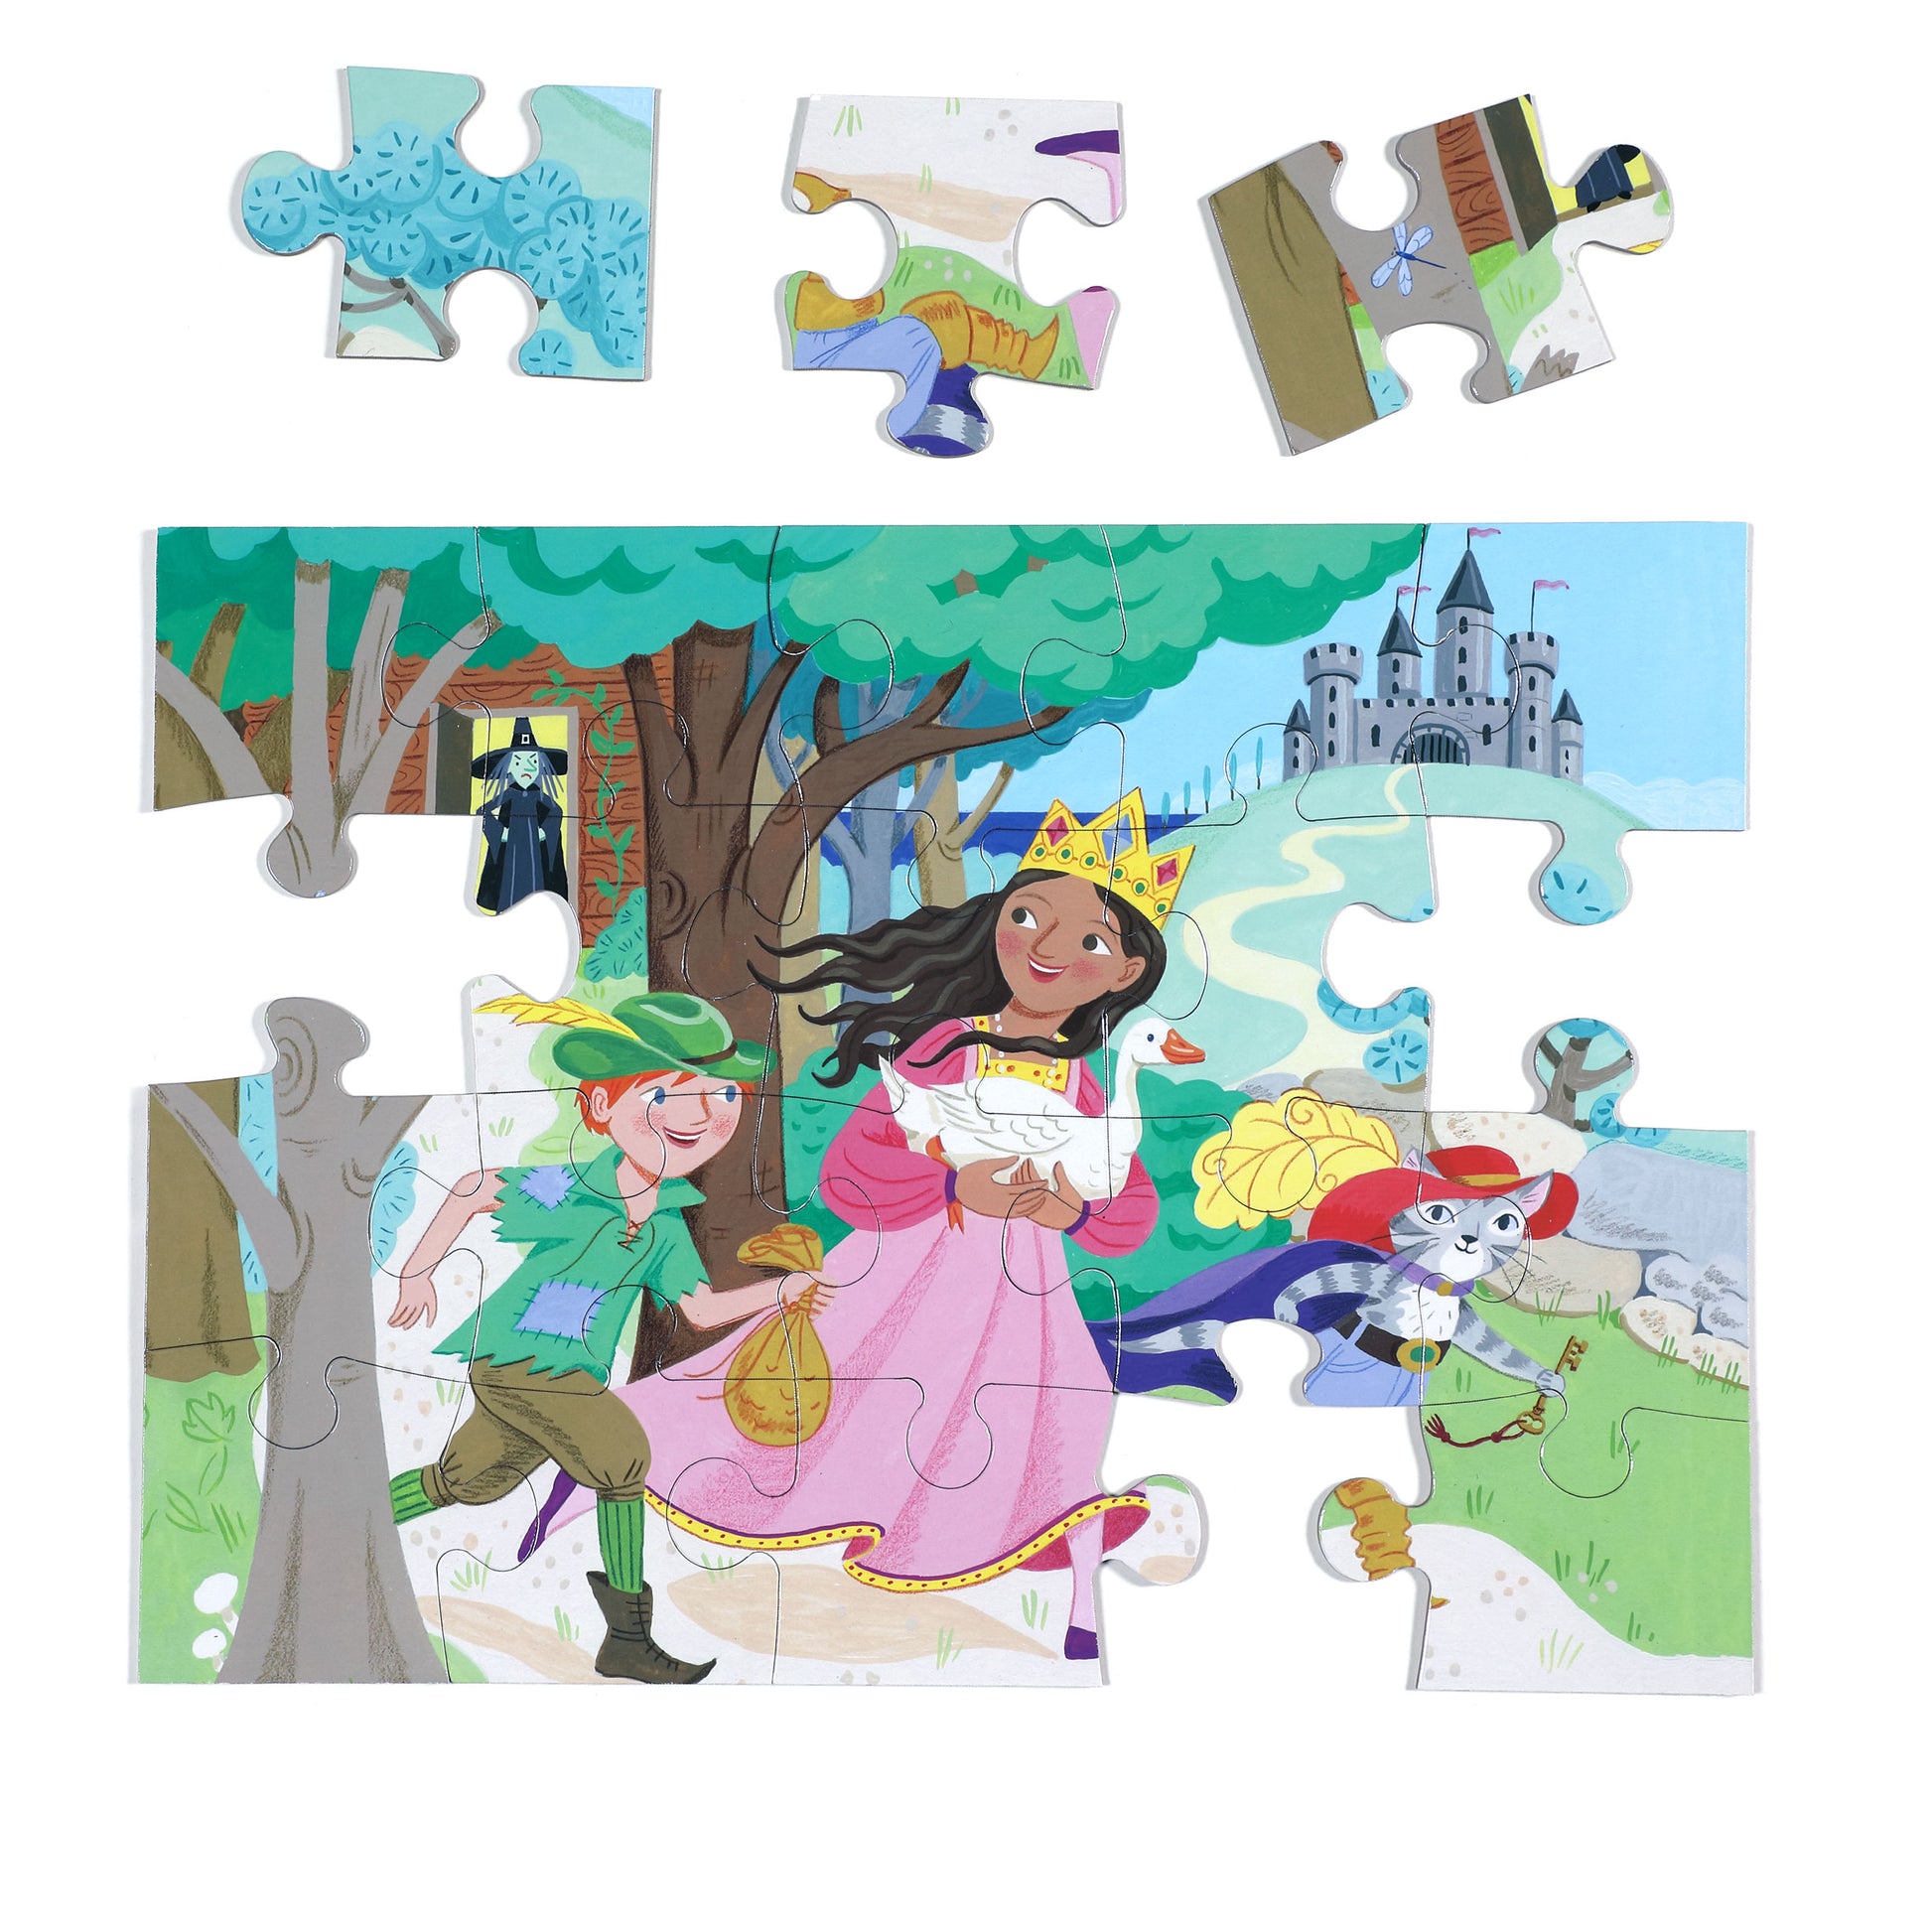 Vehicles 20 Piece Jigsaw Puzzle by eeBoo Fun Unique Gifts for Kids 3+